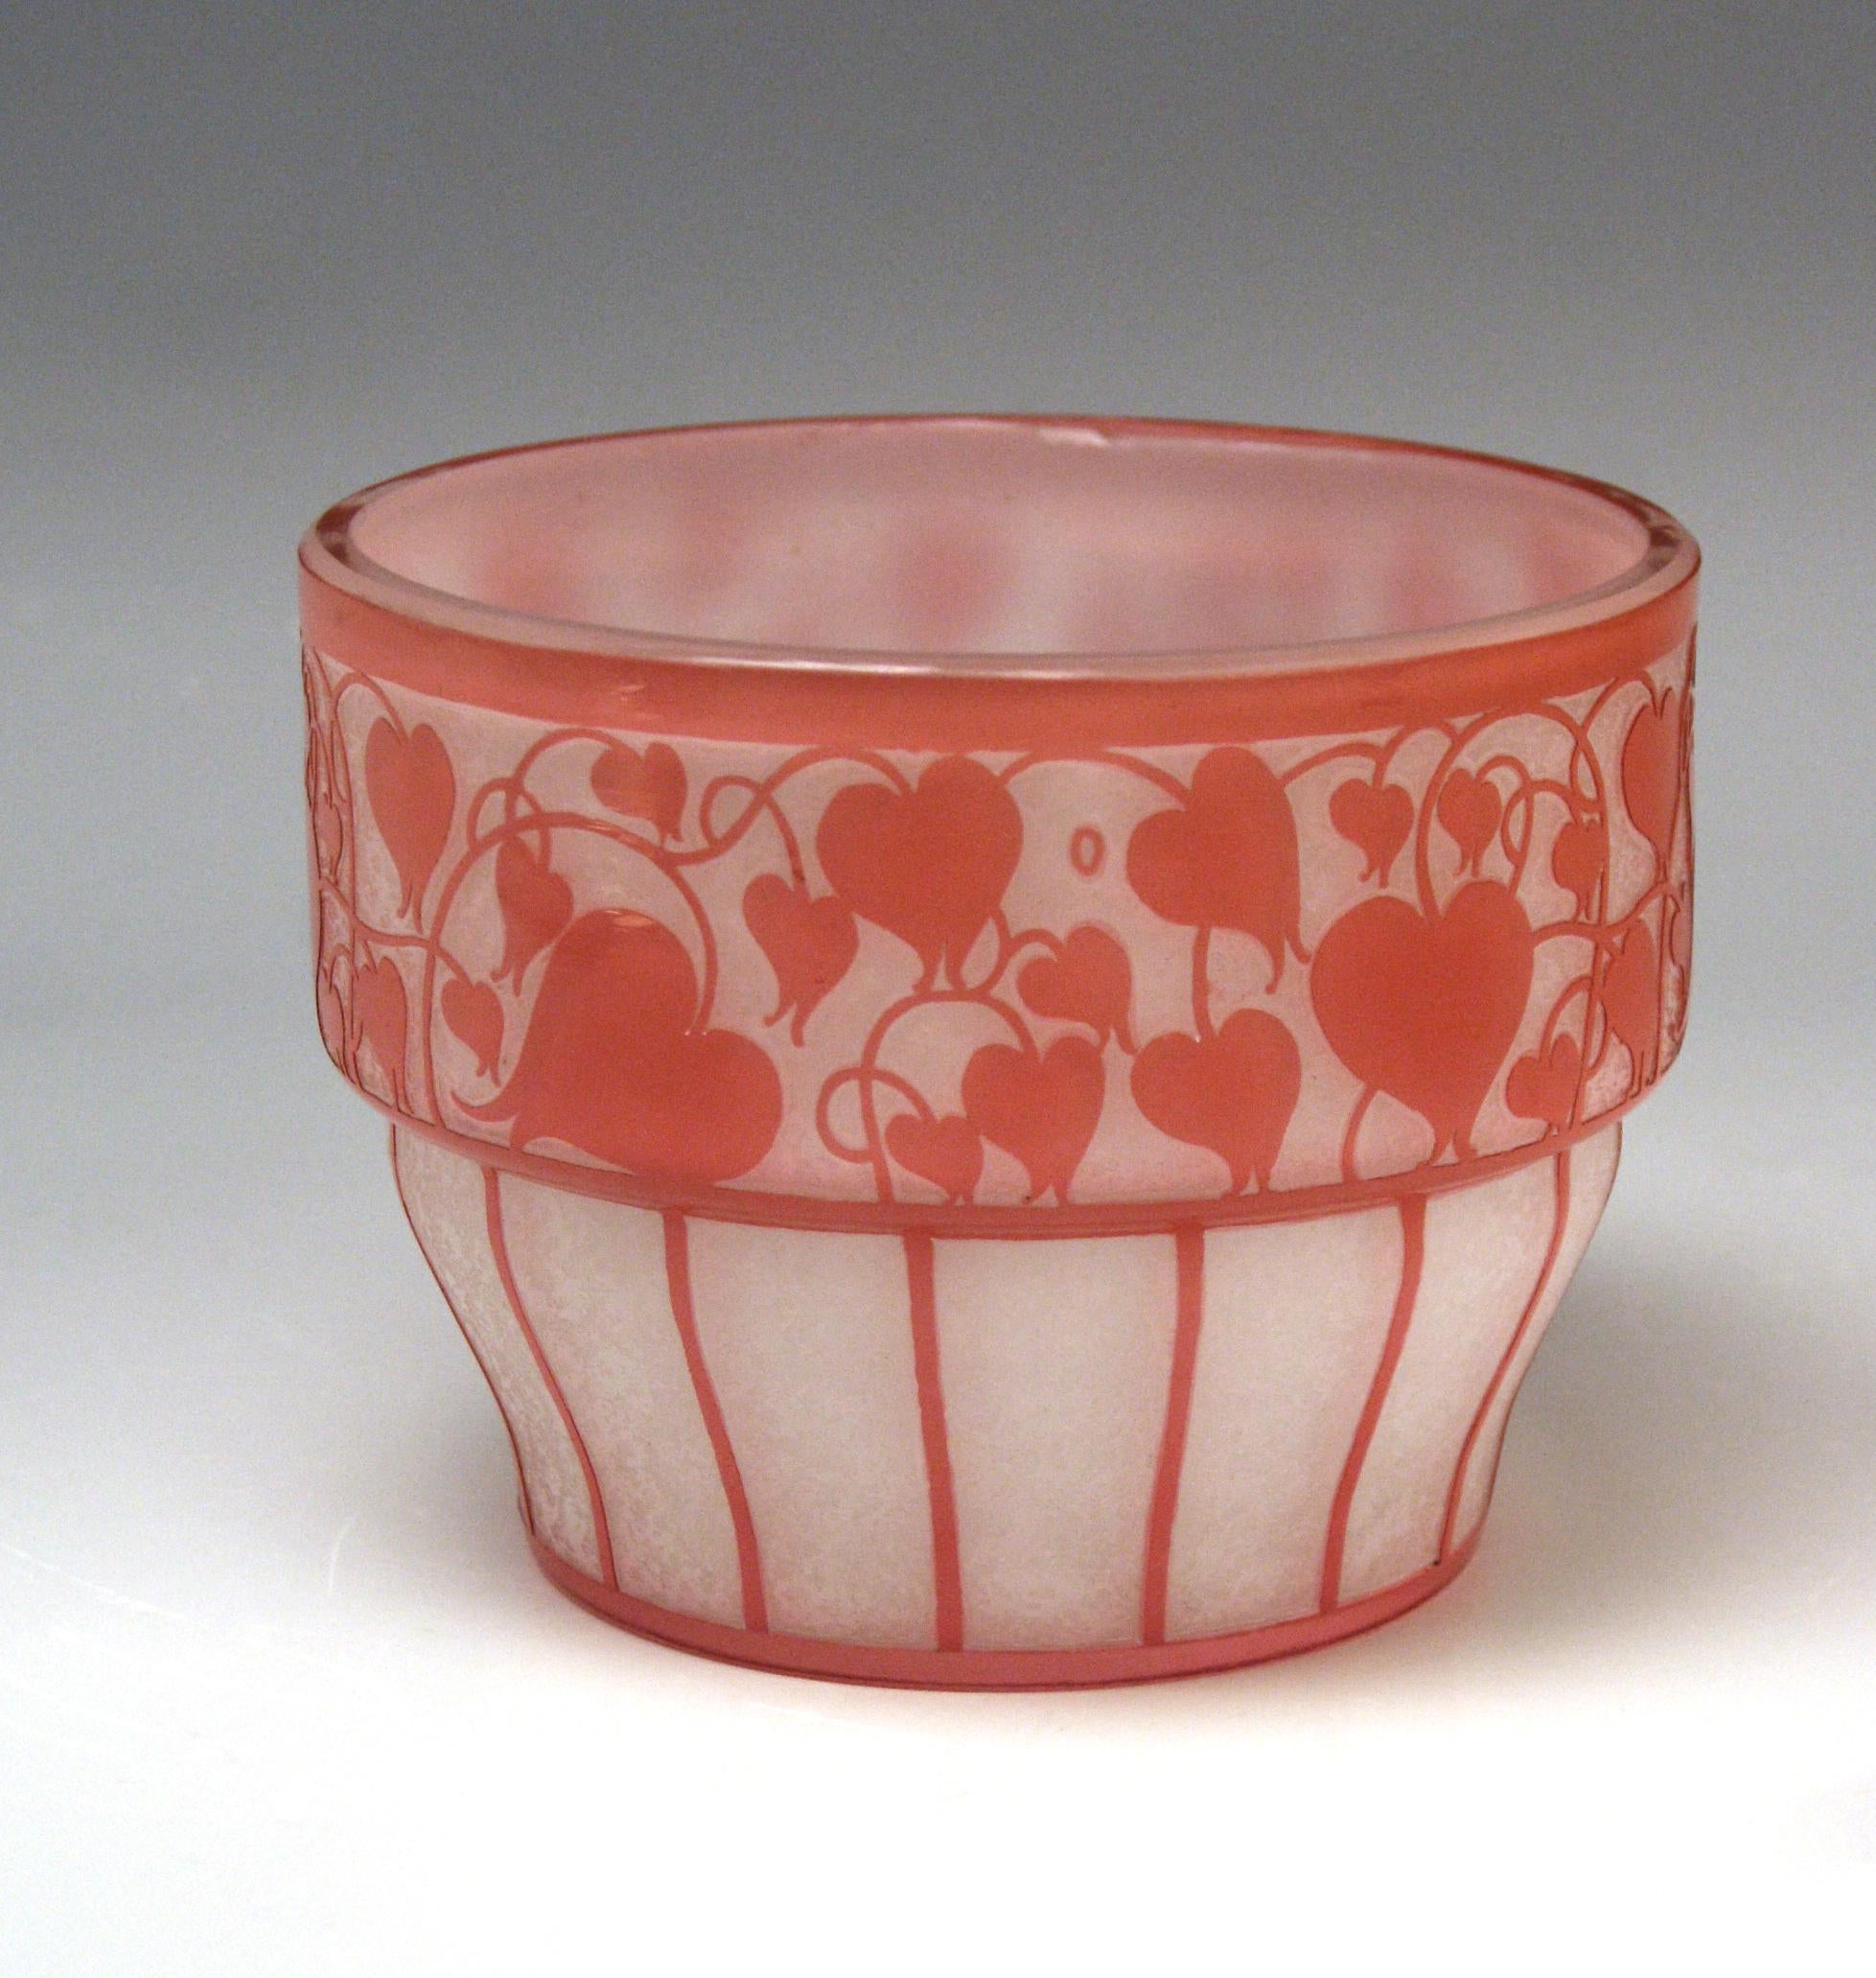 Loetz bowl opaline glass with salmon pink designed by Hans Bolek, (1890-1978):
Bolek was one of the founders of the so-said 'Österreichischer Werkbund' in 1914, he was working together with Josef Hoffmann during the period